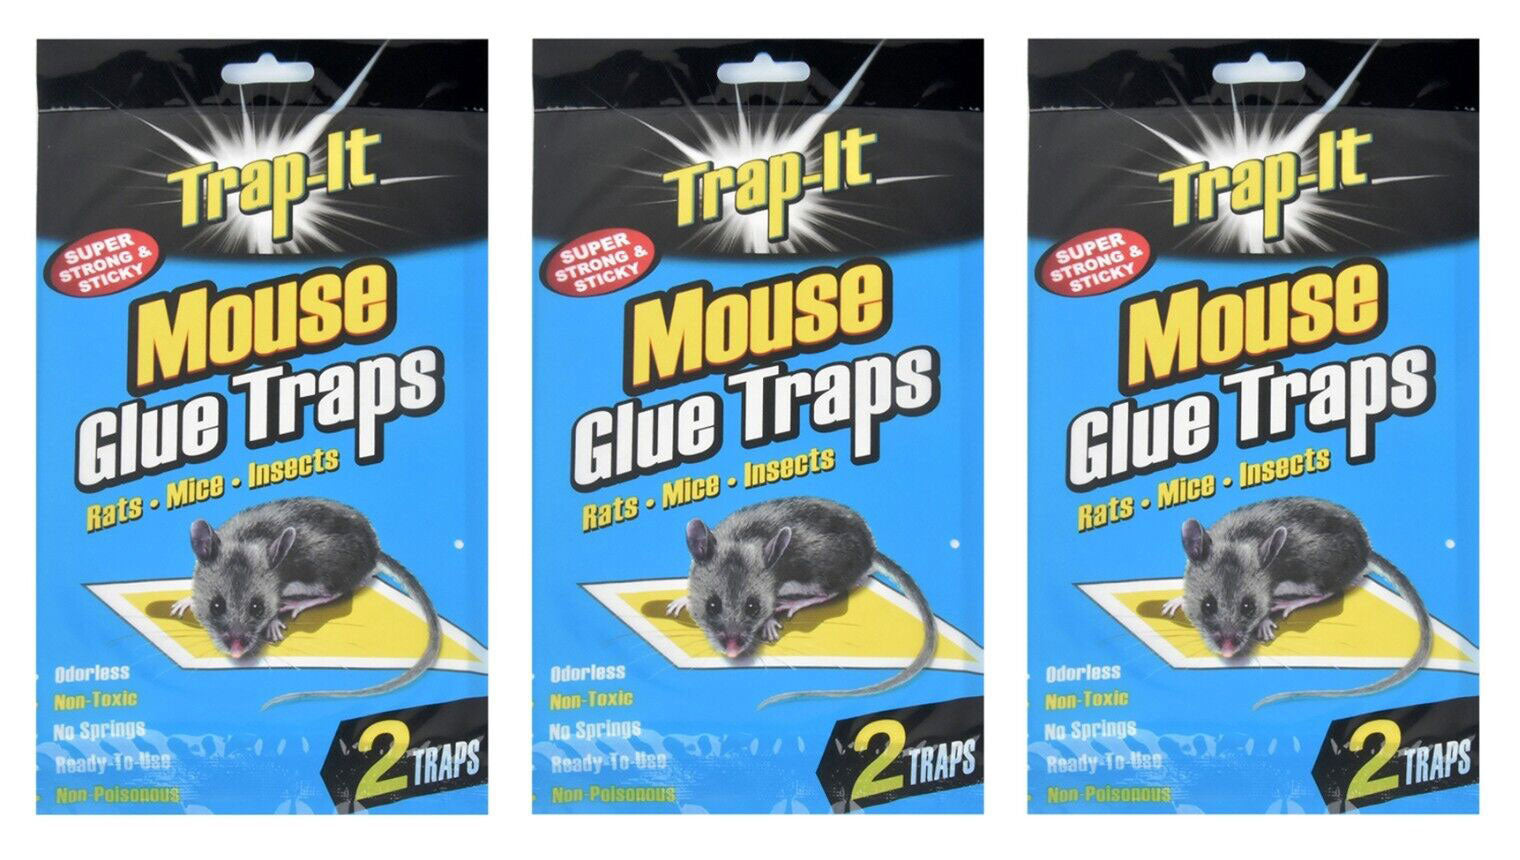 Qualirey 12 Pack Mouse and Insect Glue Traps, Strong Sticky Mice Traps  Indoor for Home, Pre Scented Rodent Traps with Non Toxic Glue for House  Garage